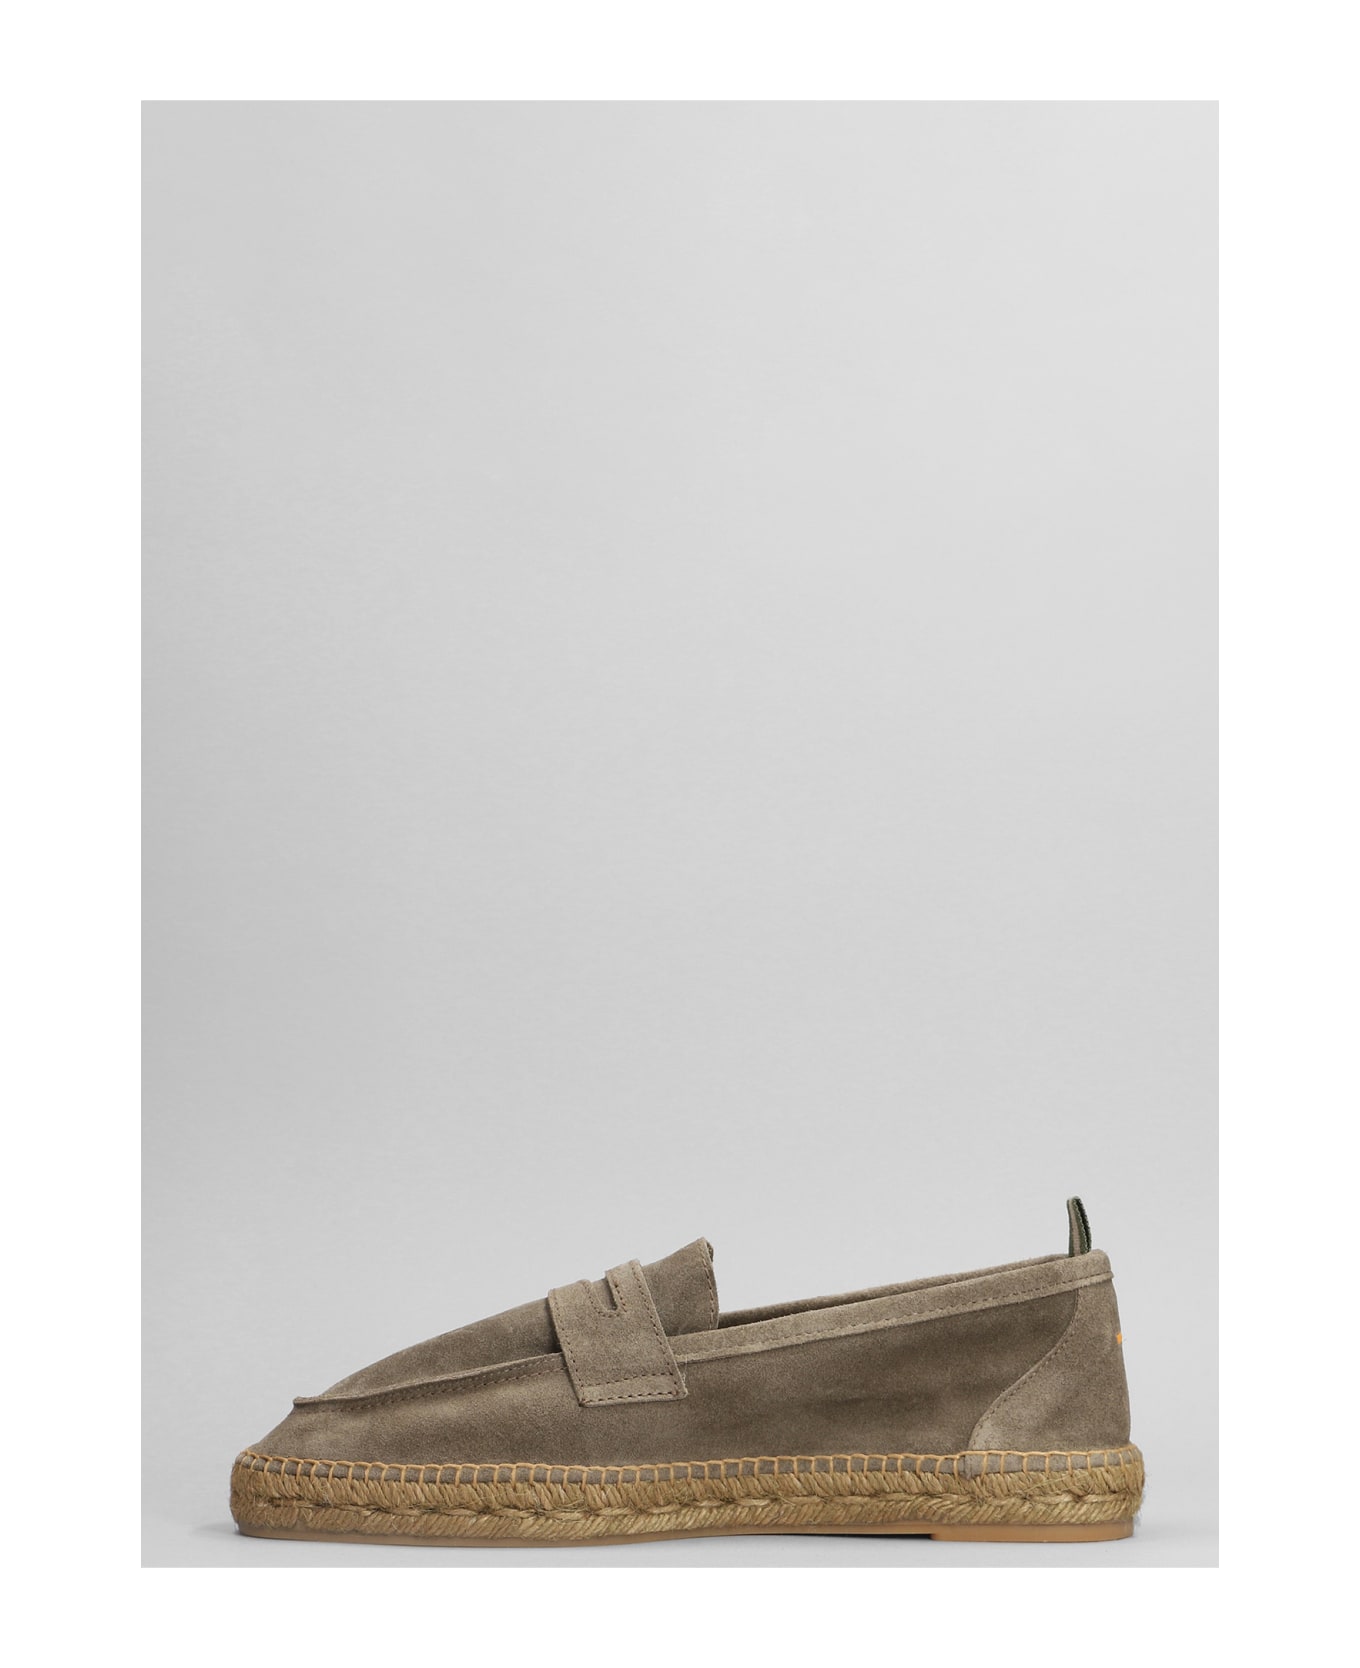 Castañer Nacho T-186 Espadrilles In Taupe Suede - taupe